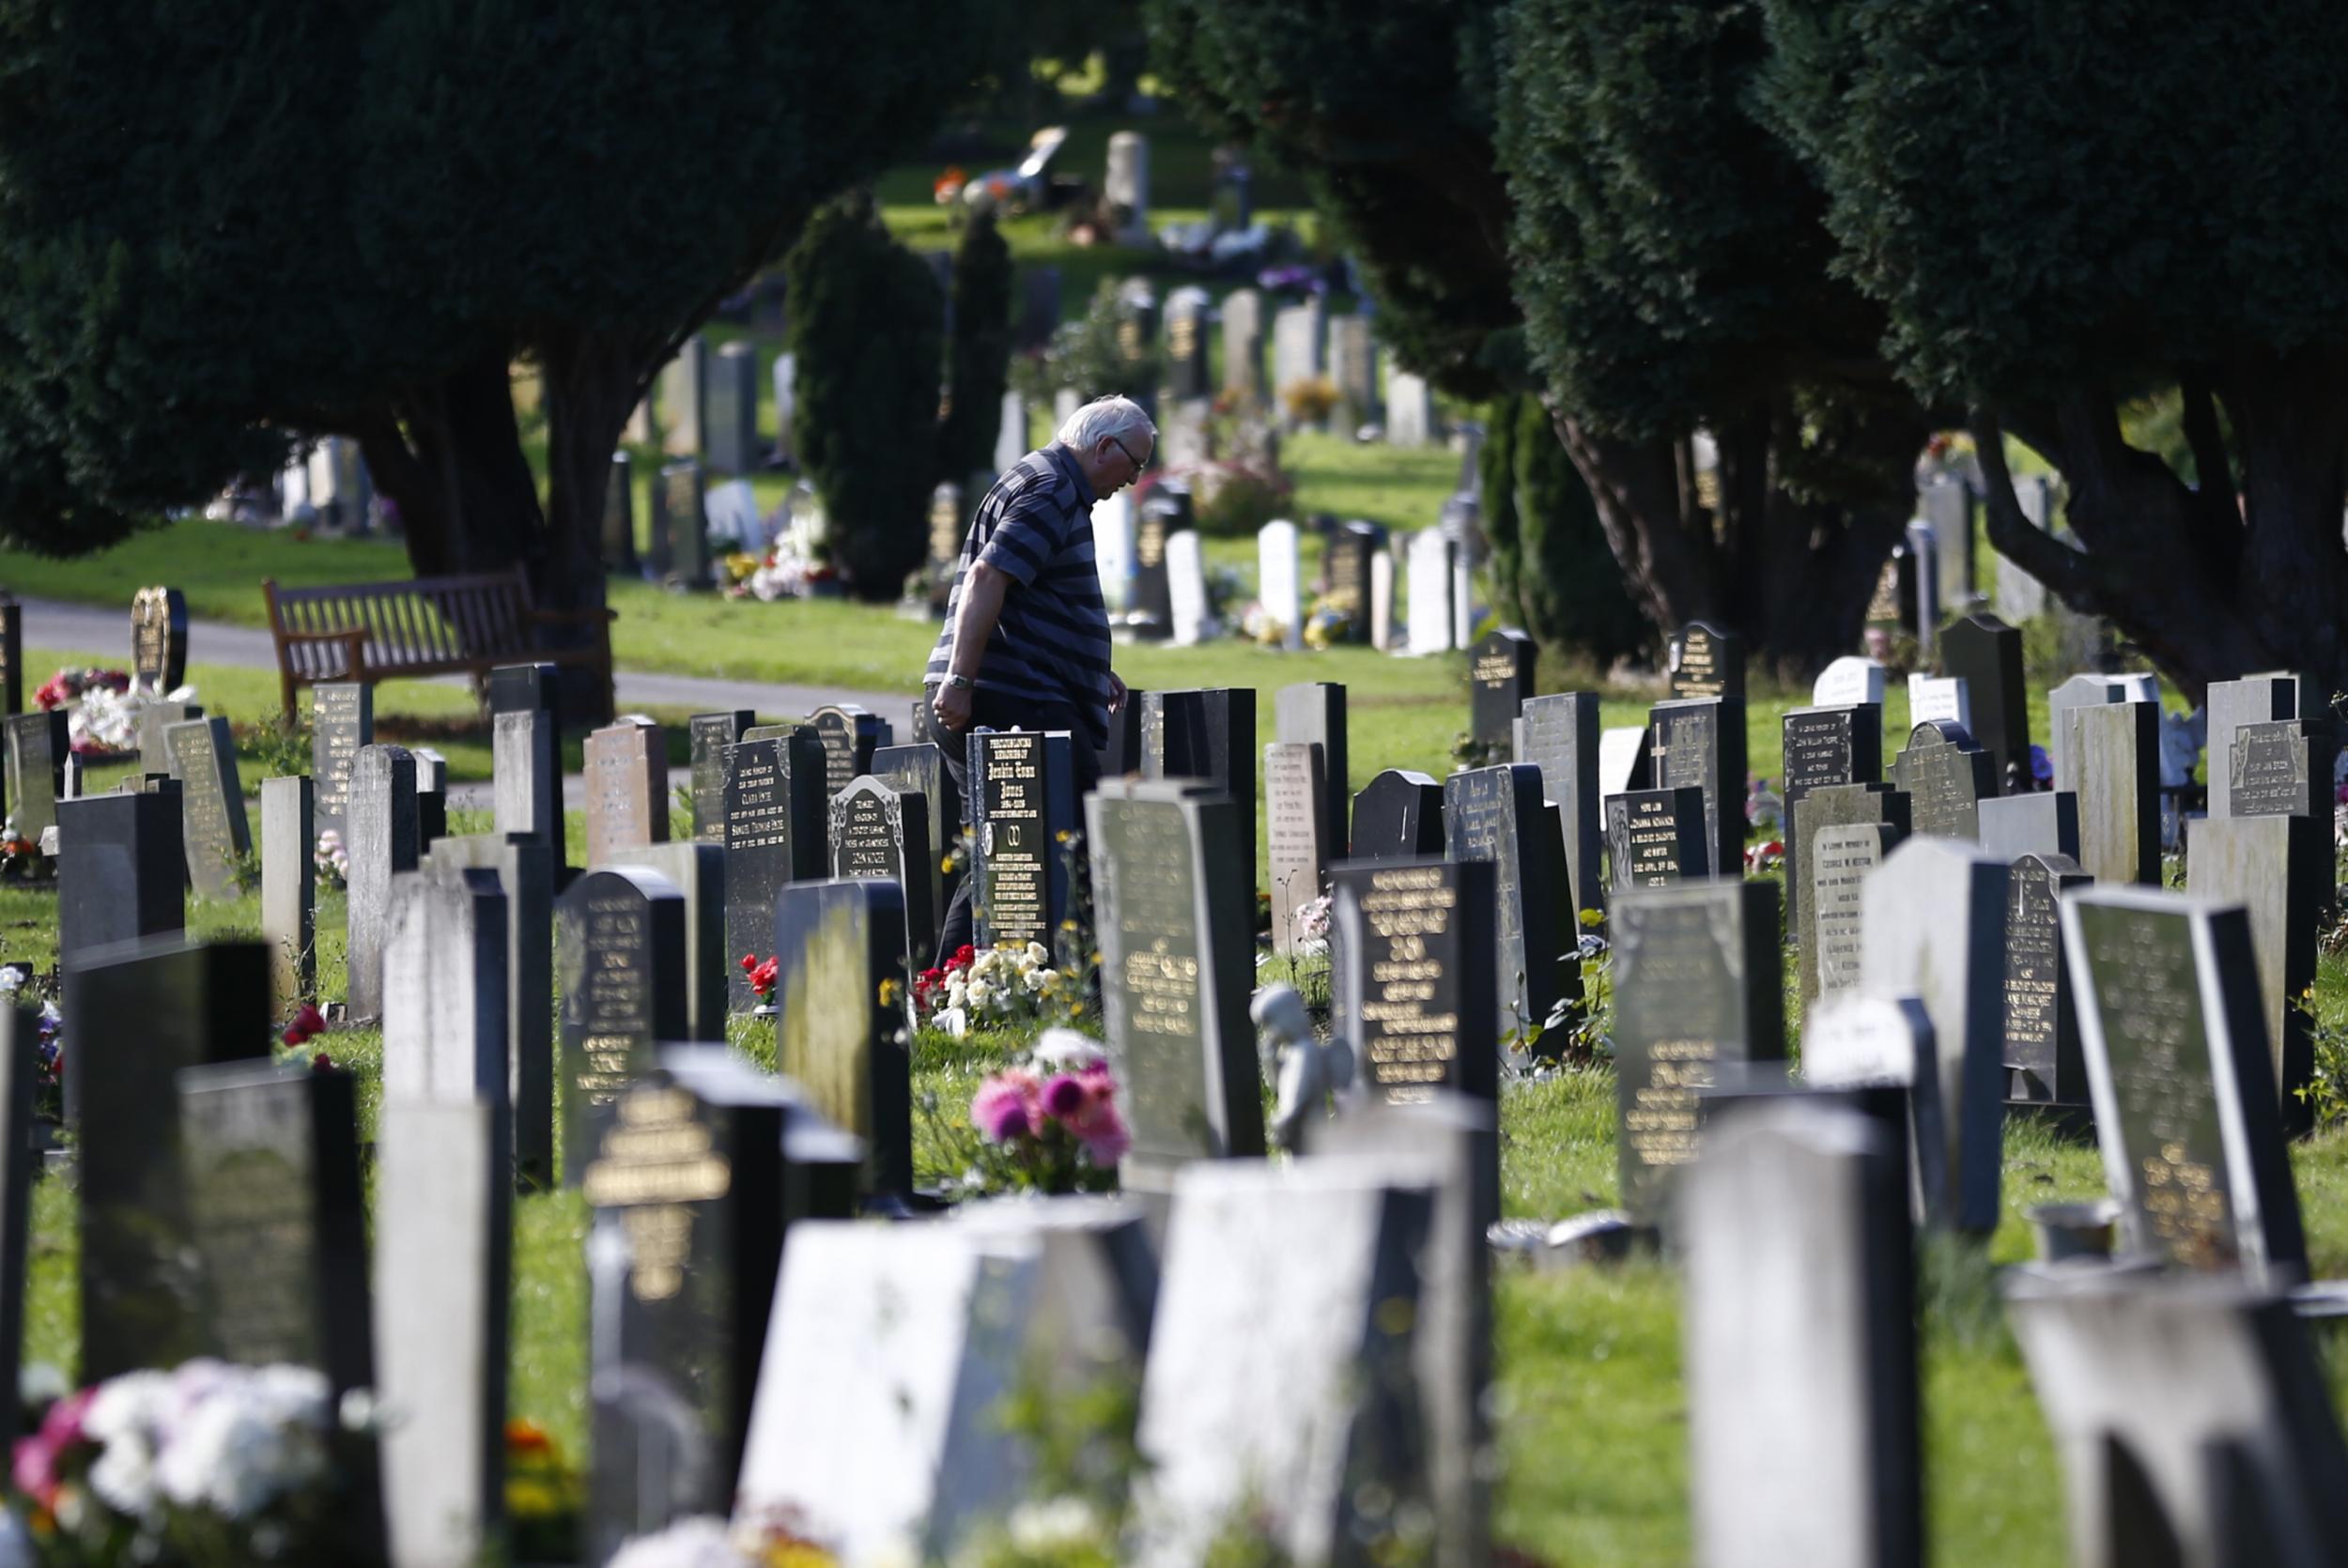 The number of people who died rose 8 per cent compared to the same period last year, increasing from 167,000 to 181,000